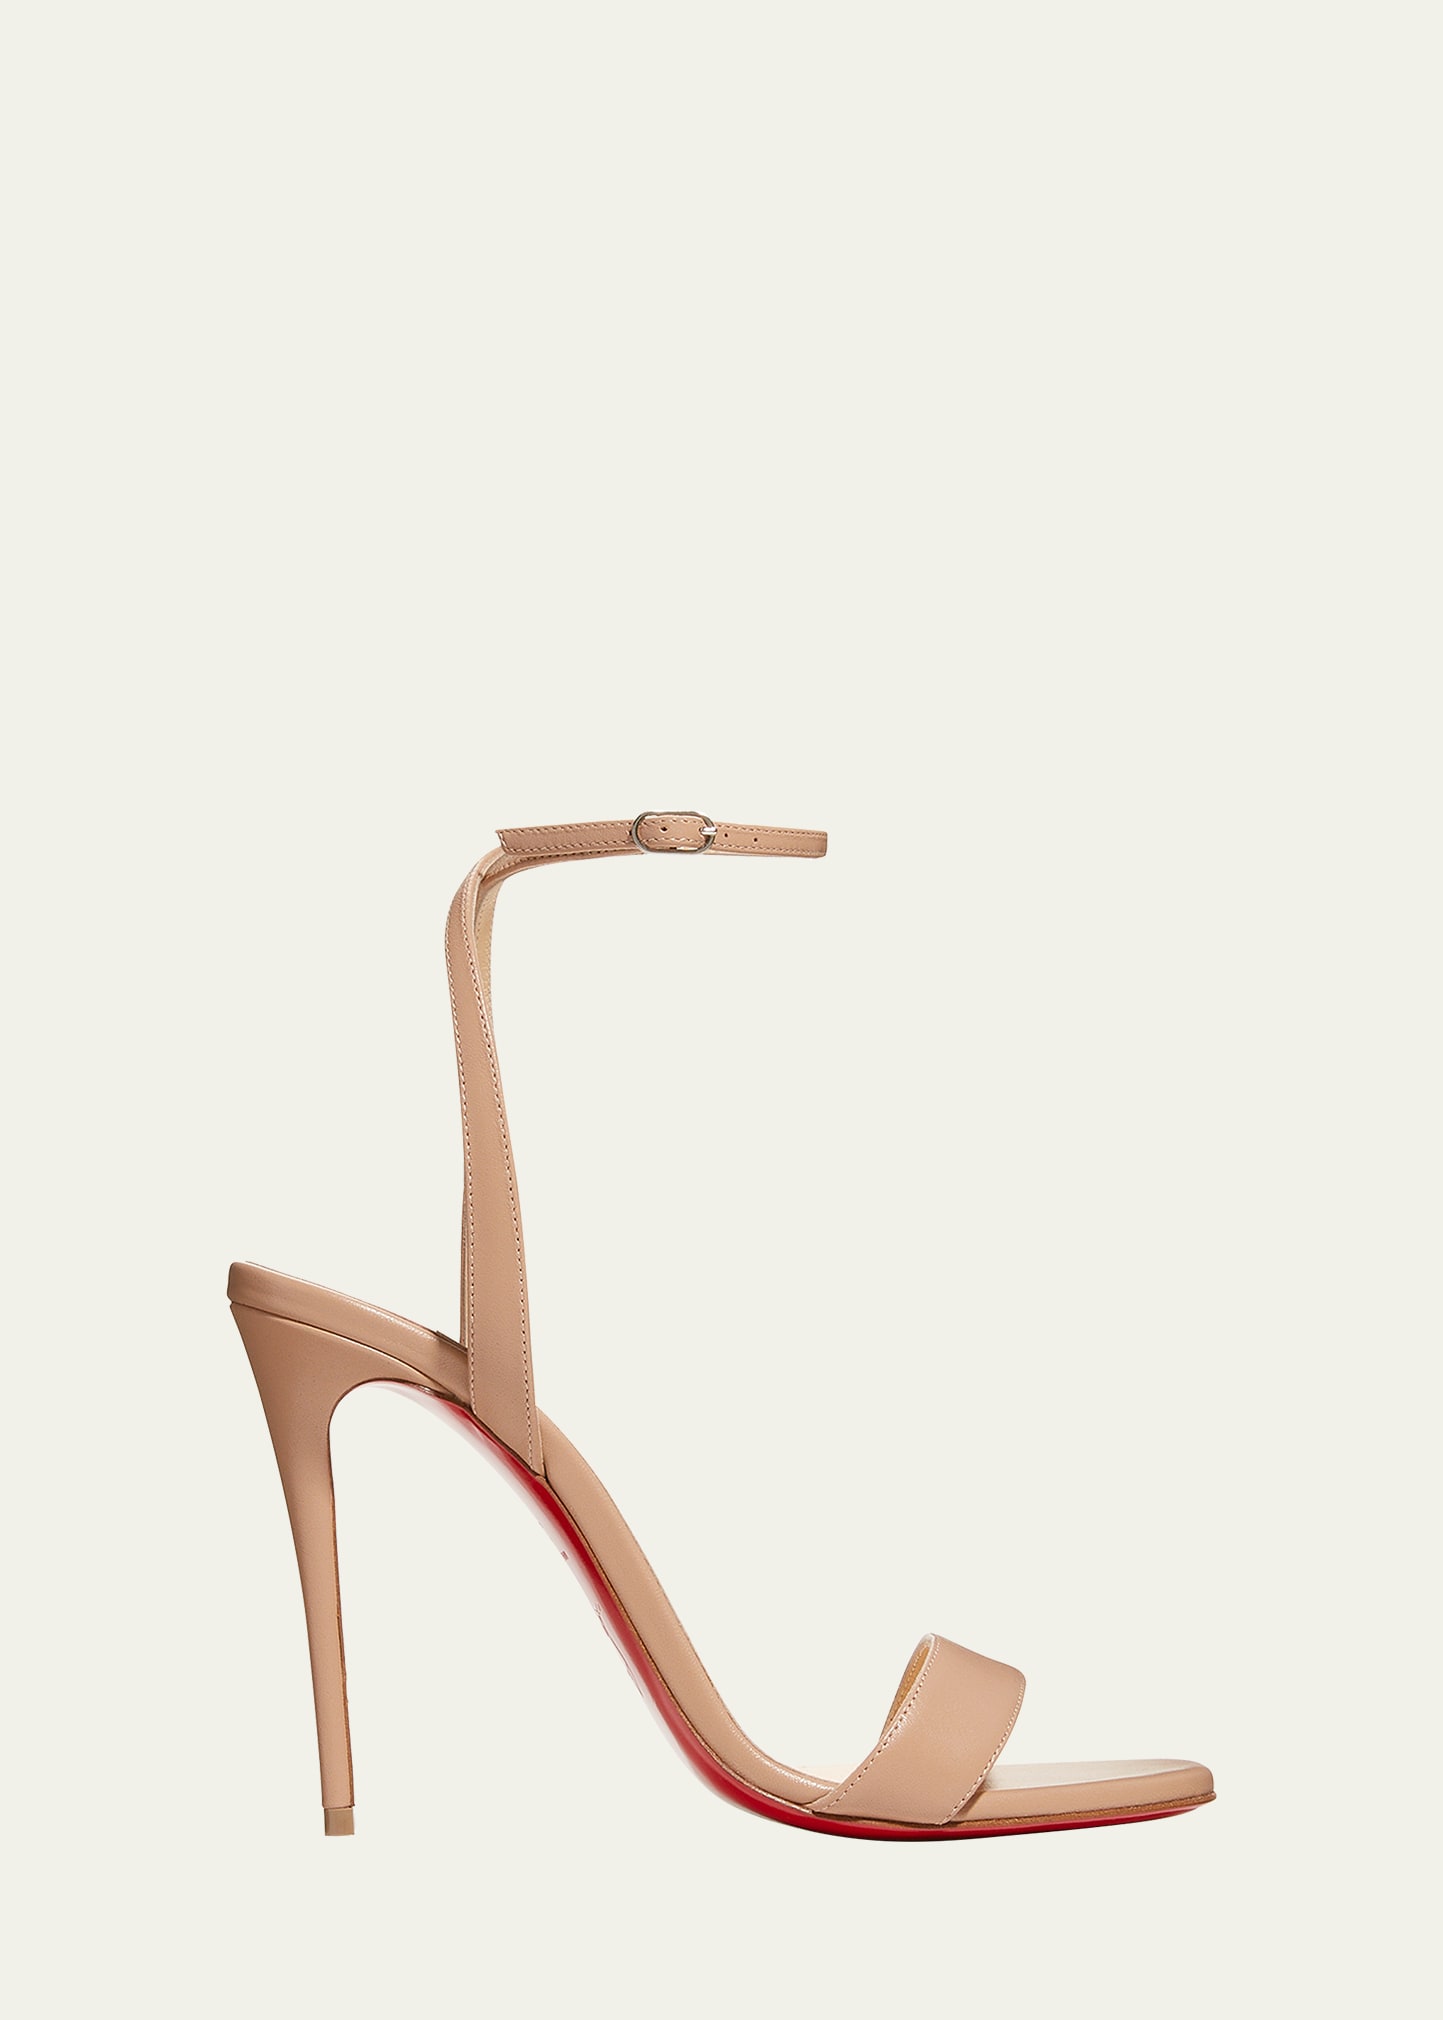 Christian Louboutin Loubigirl Ankle-strap Red Sole Sandals In Blush